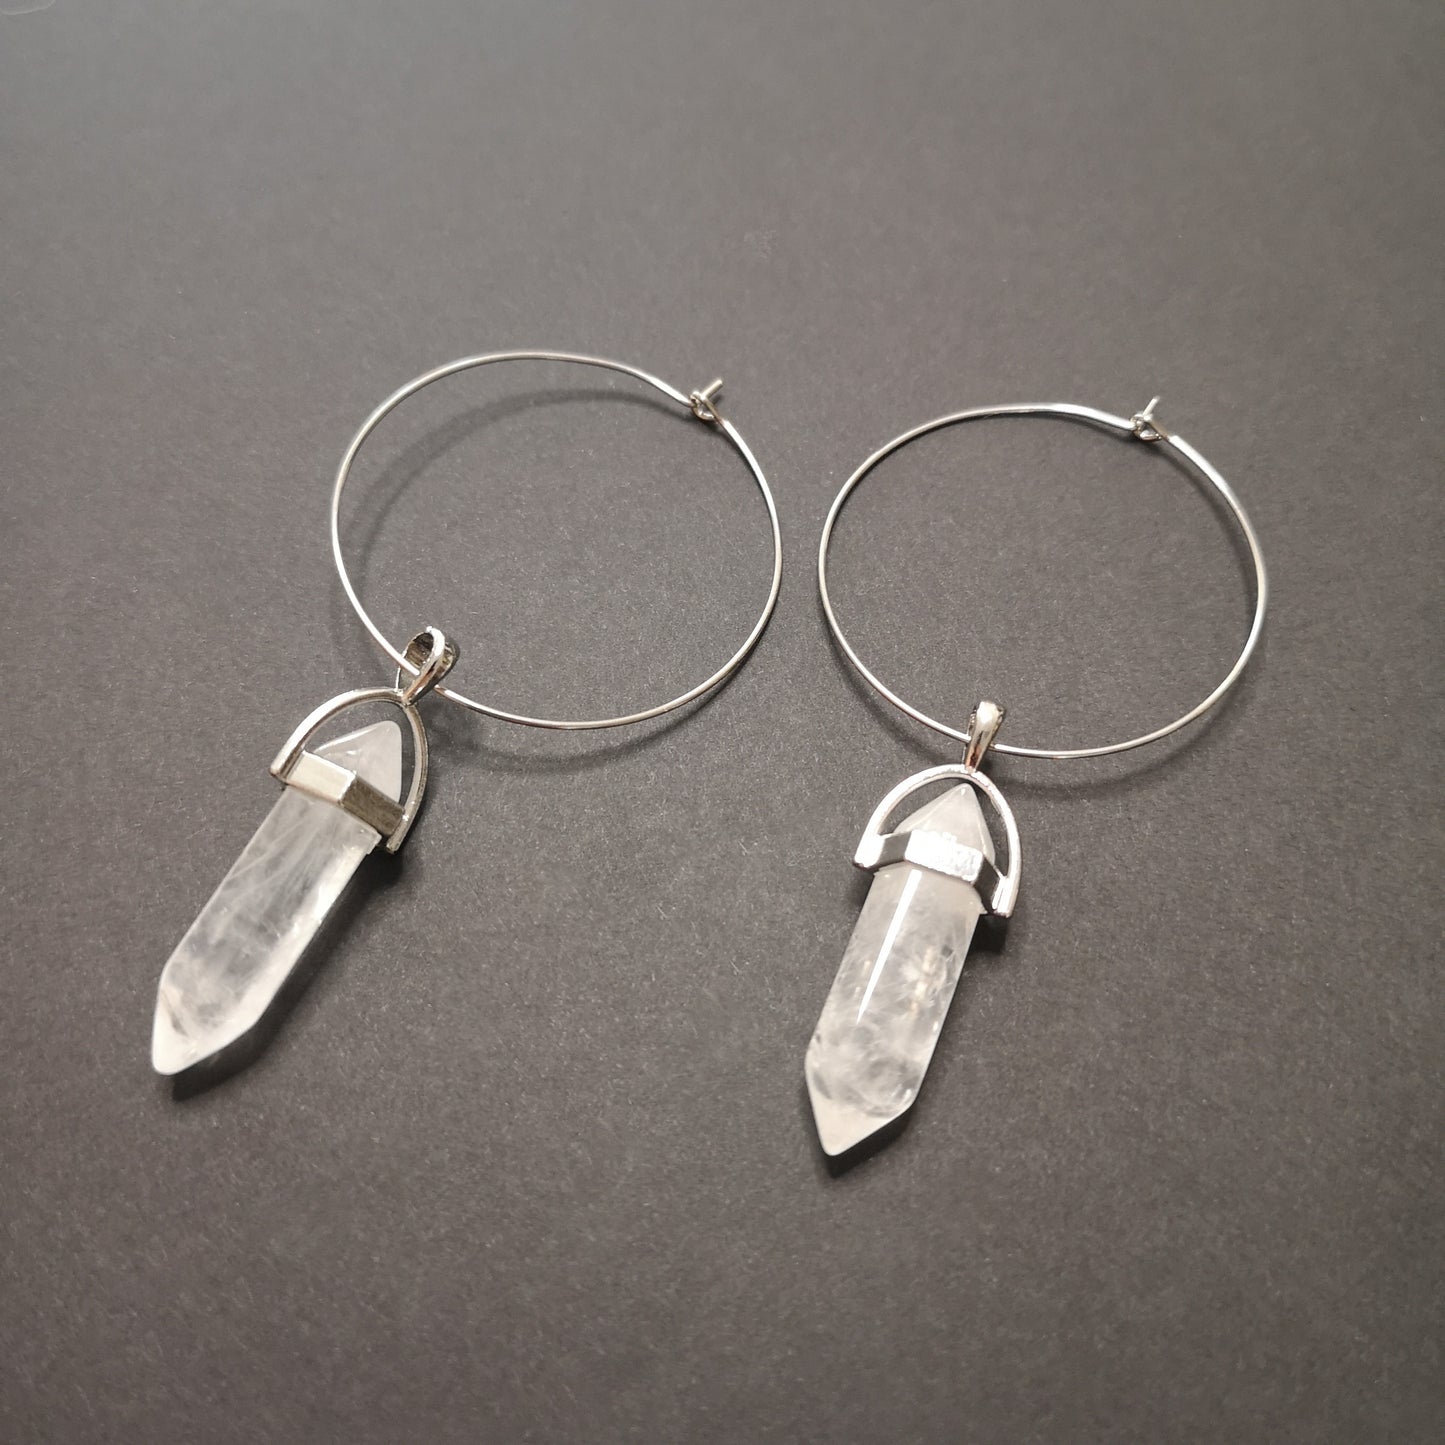 Quartz hoop earrings boho and witchy jewelry